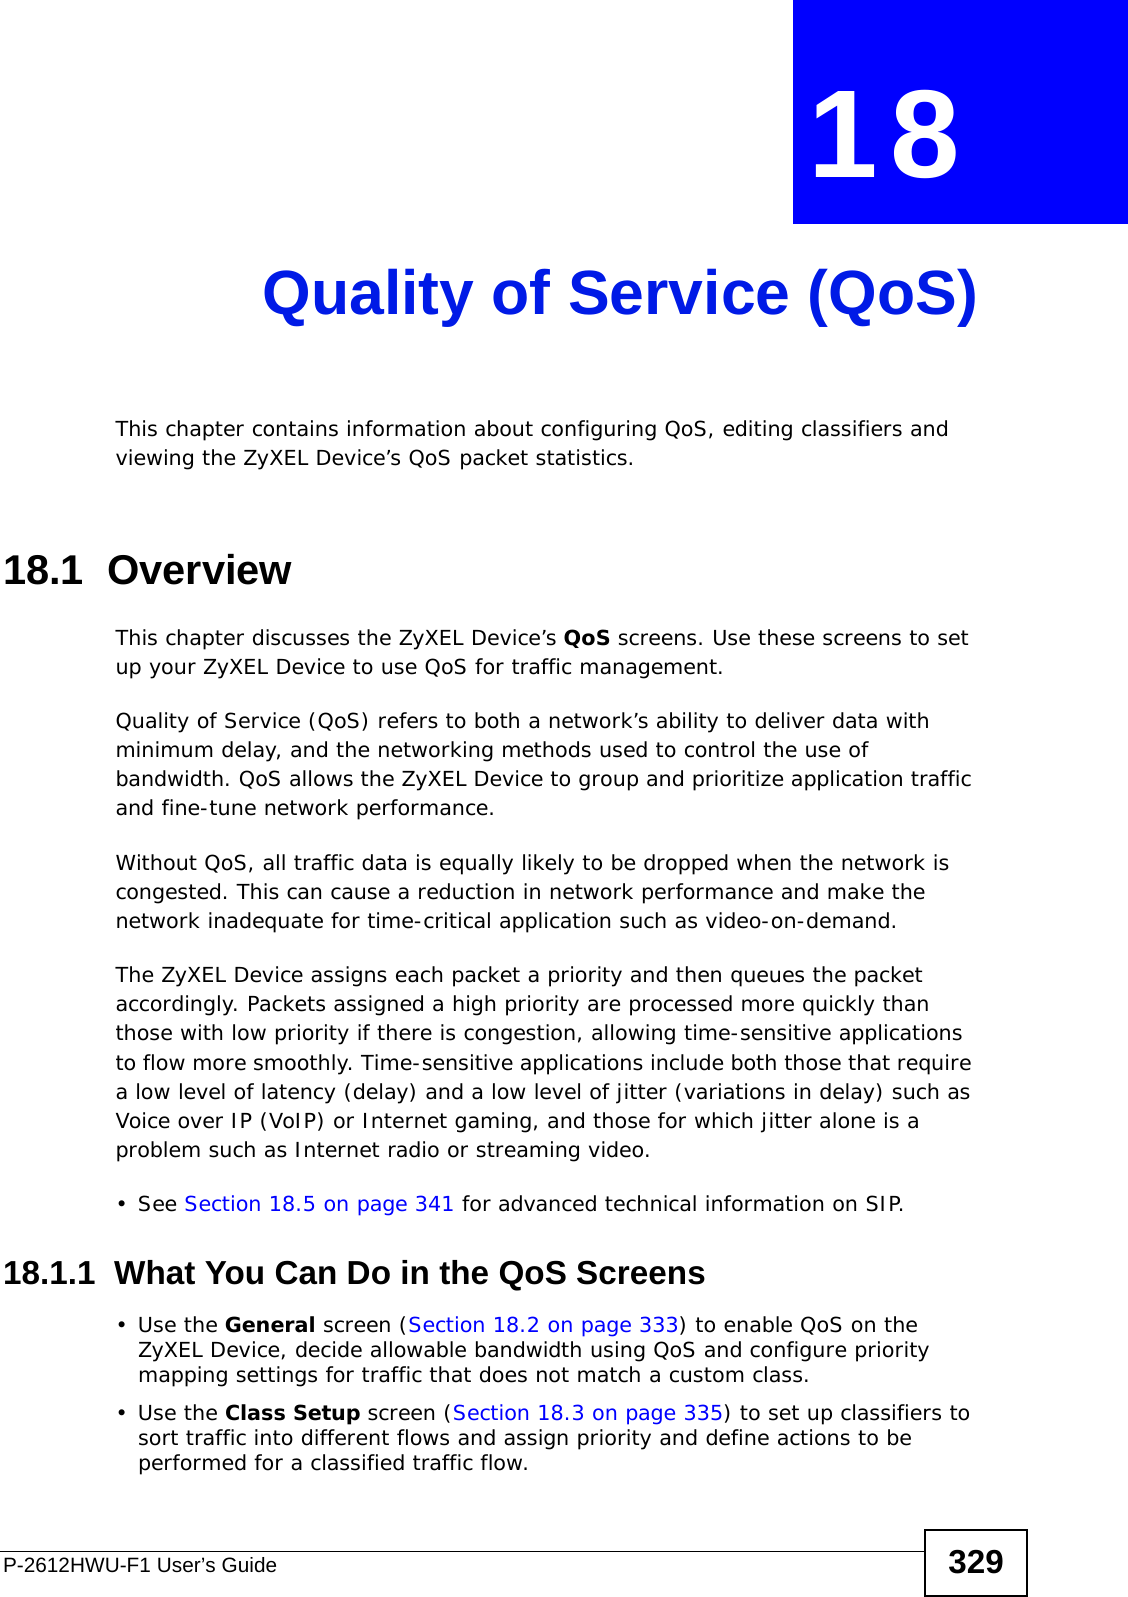 P-2612HWU-F1 User’s Guide 329CHAPTER  18 Quality of Service (QoS)This chapter contains information about configuring QoS, editing classifiers and viewing the ZyXEL Device’s QoS packet statistics.18.1  OverviewThis chapter discusses the ZyXEL Device’s QoS screens. Use these screens to set up your ZyXEL Device to use QoS for traffic management. Quality of Service (QoS) refers to both a network’s ability to deliver data with minimum delay, and the networking methods used to control the use of bandwidth. QoS allows the ZyXEL Device to group and prioritize application traffic and fine-tune network performance. Without QoS, all traffic data is equally likely to be dropped when the network is congested. This can cause a reduction in network performance and make the network inadequate for time-critical application such as video-on-demand.The ZyXEL Device assigns each packet a priority and then queues the packet accordingly. Packets assigned a high priority are processed more quickly than those with low priority if there is congestion, allowing time-sensitive applications to flow more smoothly. Time-sensitive applications include both those that require a low level of latency (delay) and a low level of jitter (variations in delay) such as Voice over IP (VoIP) or Internet gaming, and those for which jitter alone is a problem such as Internet radio or streaming video.• See Section 18.5 on page 341 for advanced technical information on SIP.18.1.1  What You Can Do in the QoS Screens•Use the General screen (Section 18.2 on page 333) to enable QoS on the ZyXEL Device, decide allowable bandwidth using QoS and configure priority mapping settings for traffic that does not match a custom class.•Use the Class Setup screen (Section 18.3 on page 335) to set up classifiers to sort traffic into different flows and assign priority and define actions to be performed for a classified traffic flow.